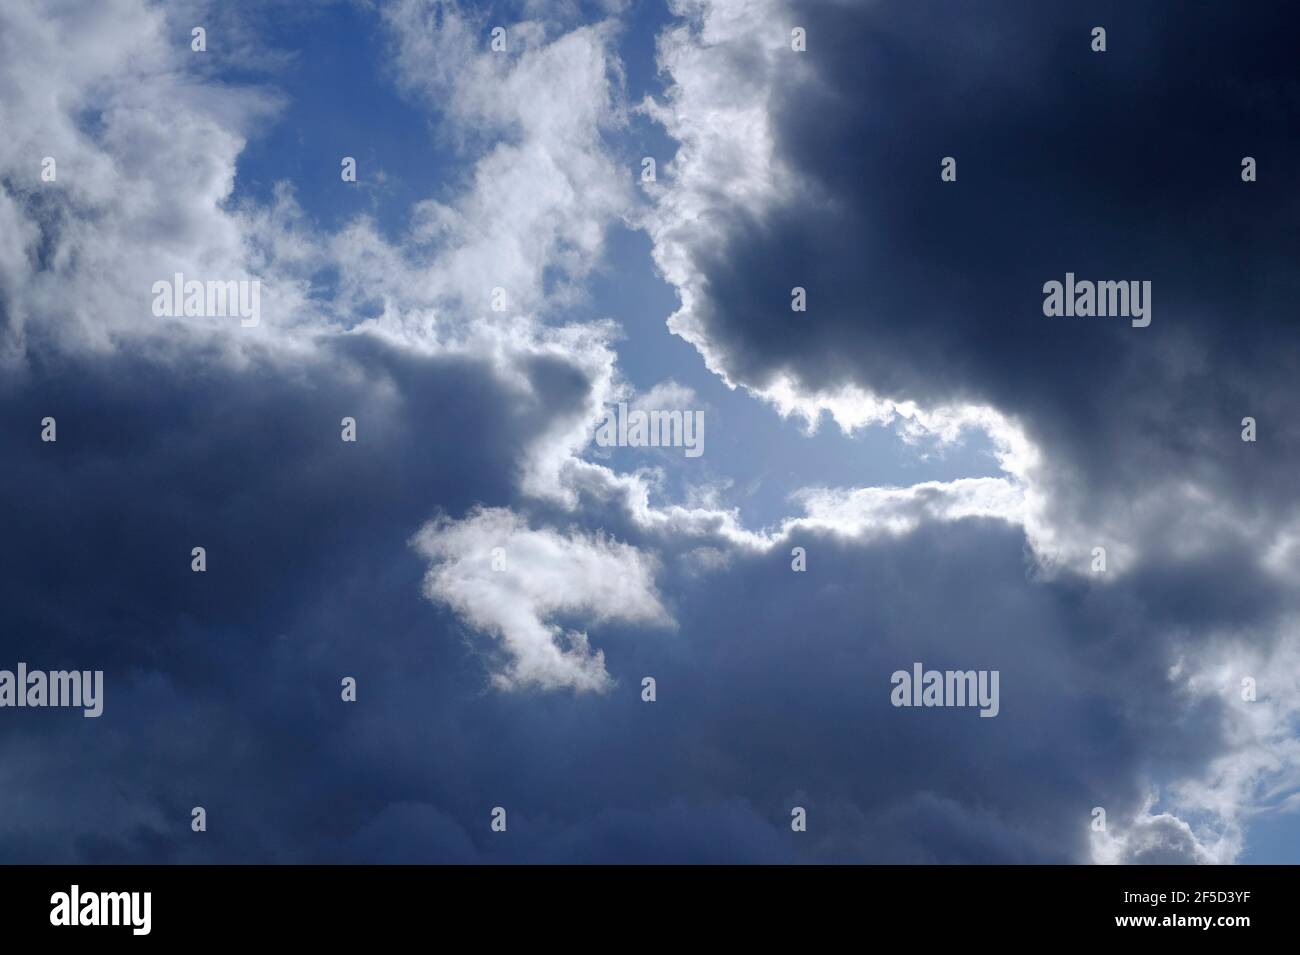 dark storm clouds with backlit sunshine Stock Photo